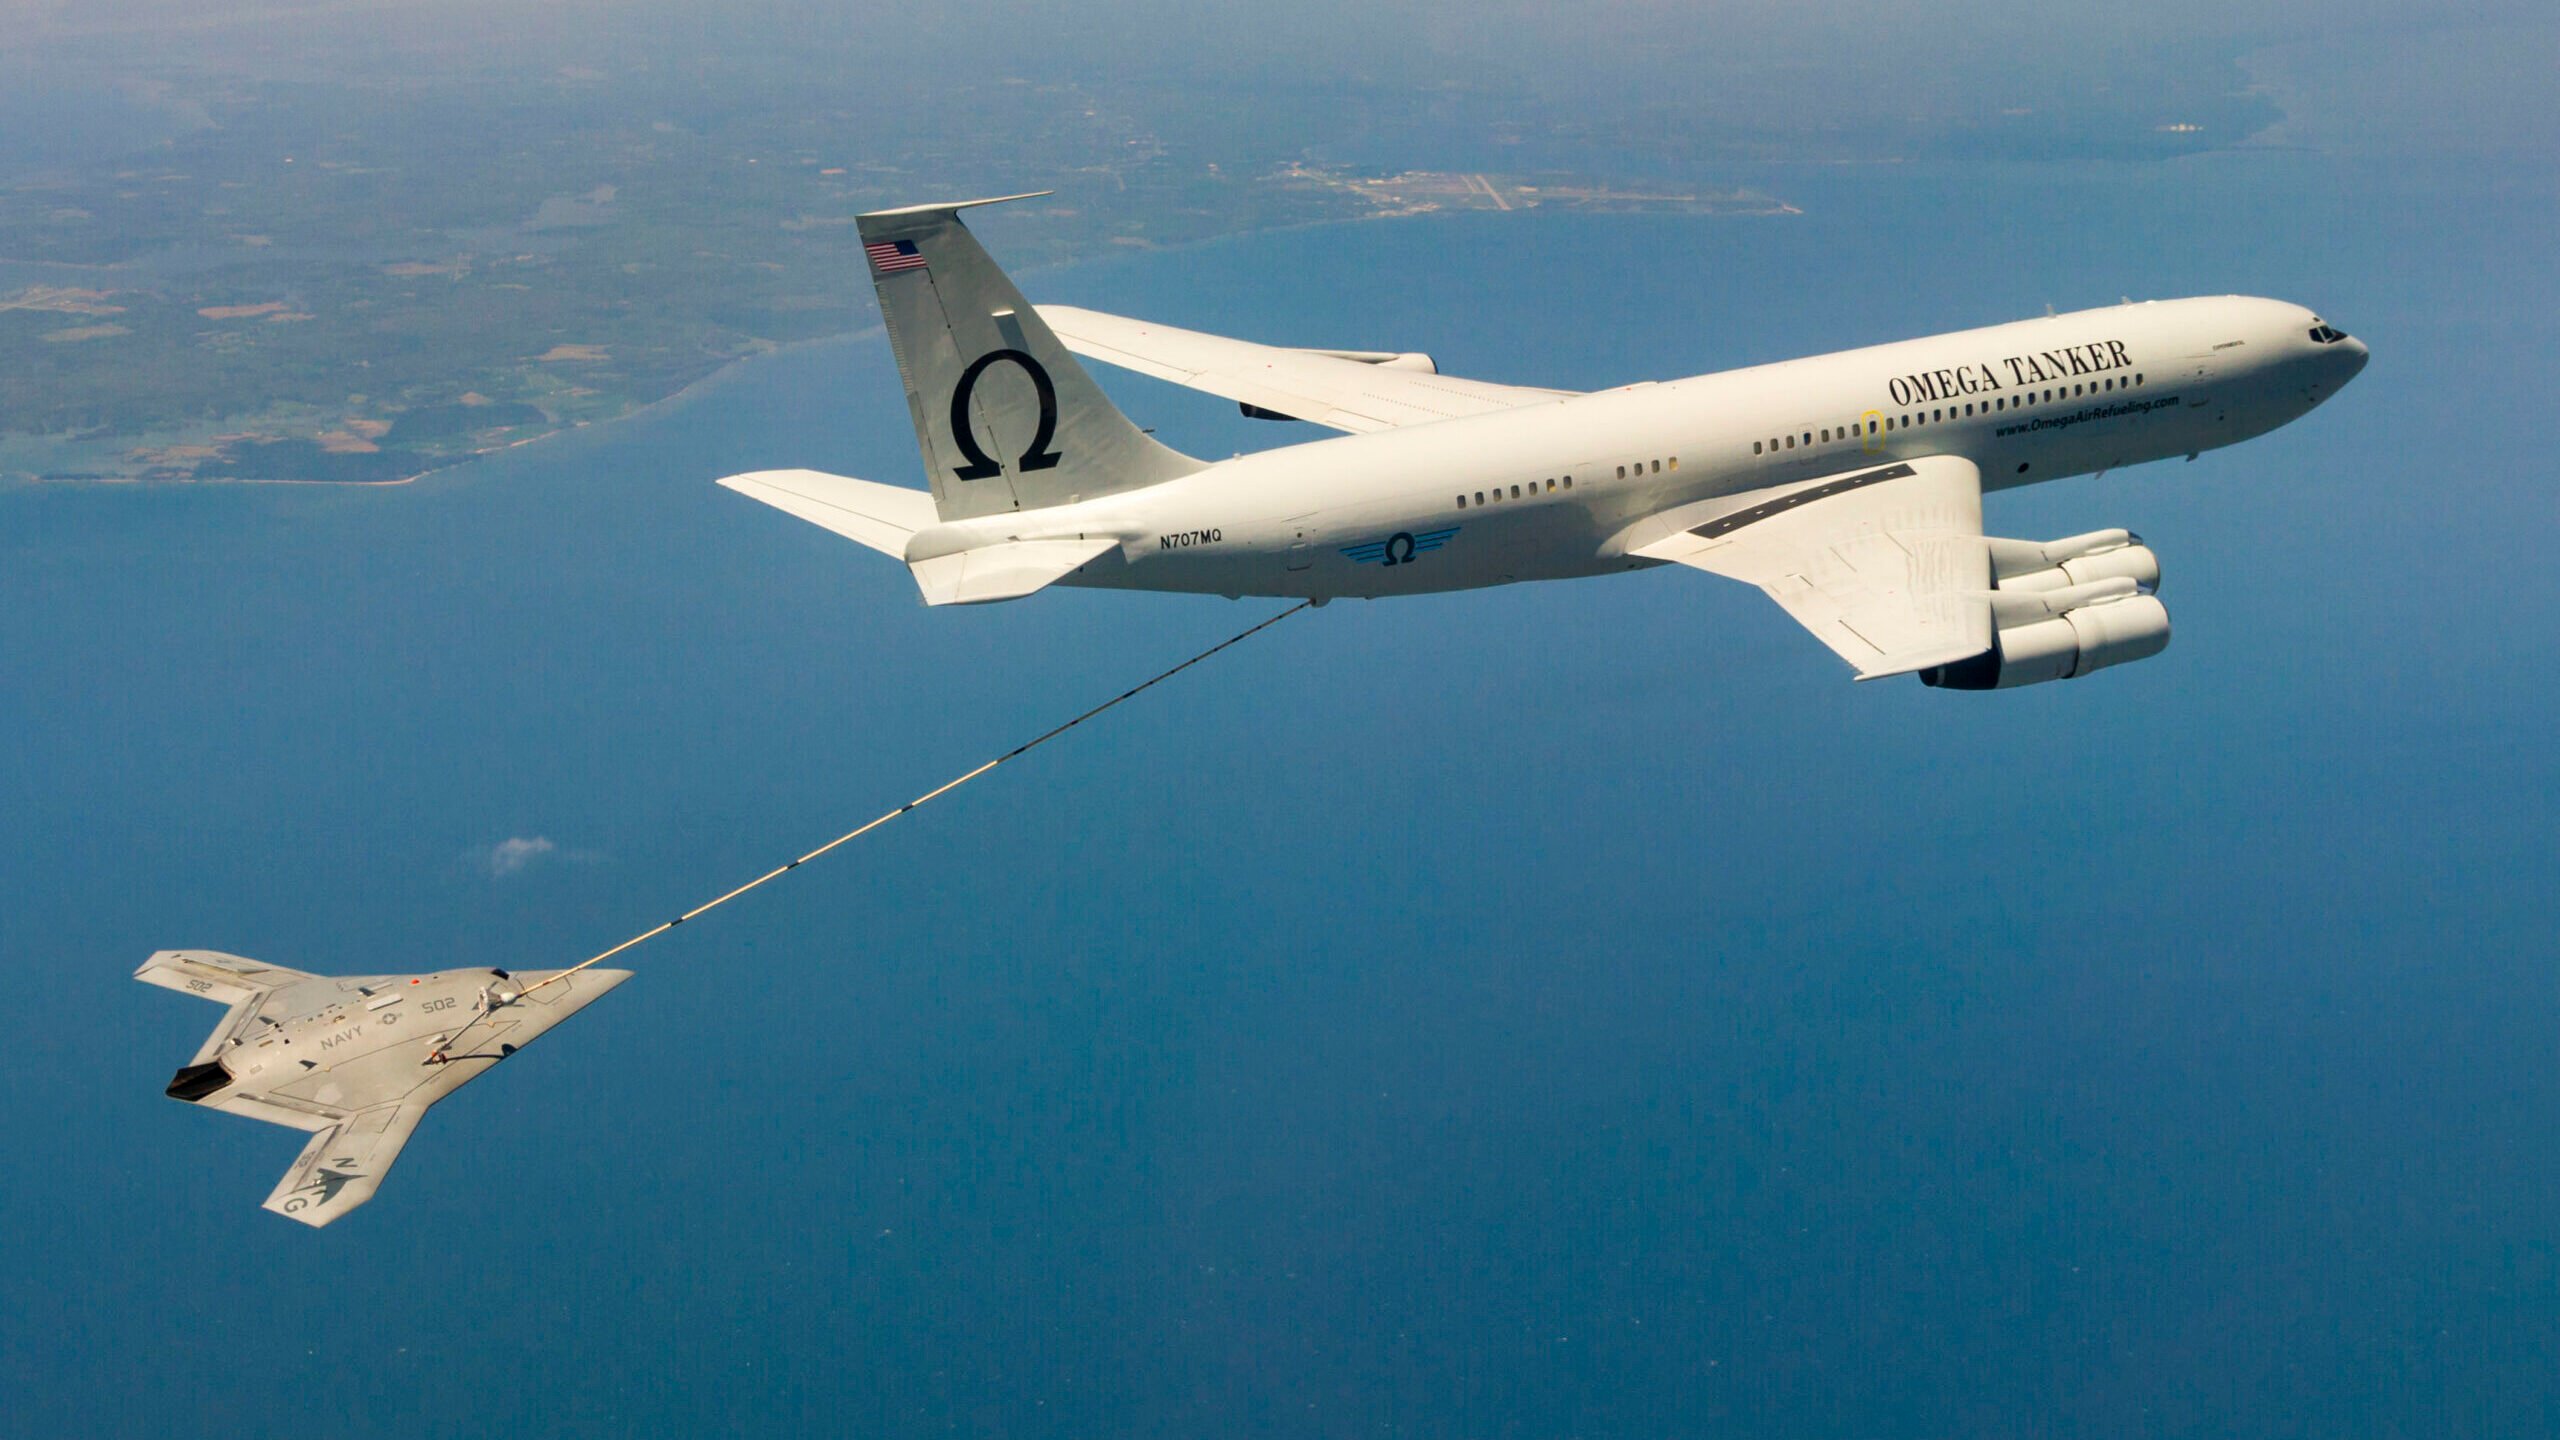 Unmanned refueling